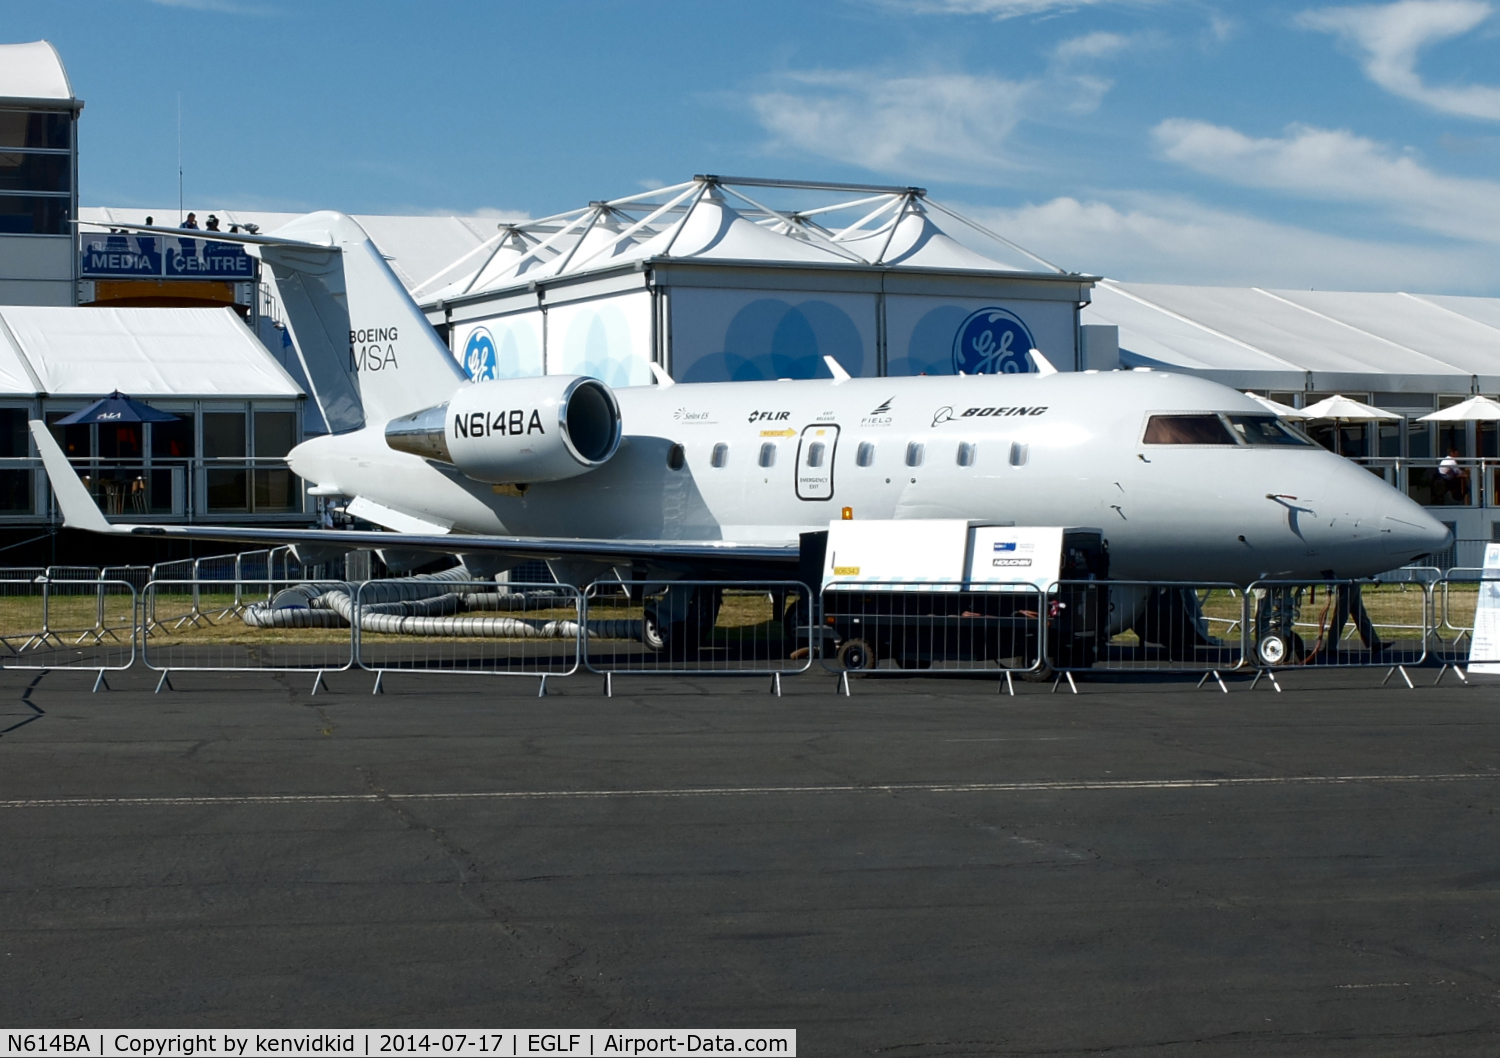 N614BA, 2005 Bombardier Challenger 604 (CL-600-2B16) C/N 5614, On static display at FIA 2014.